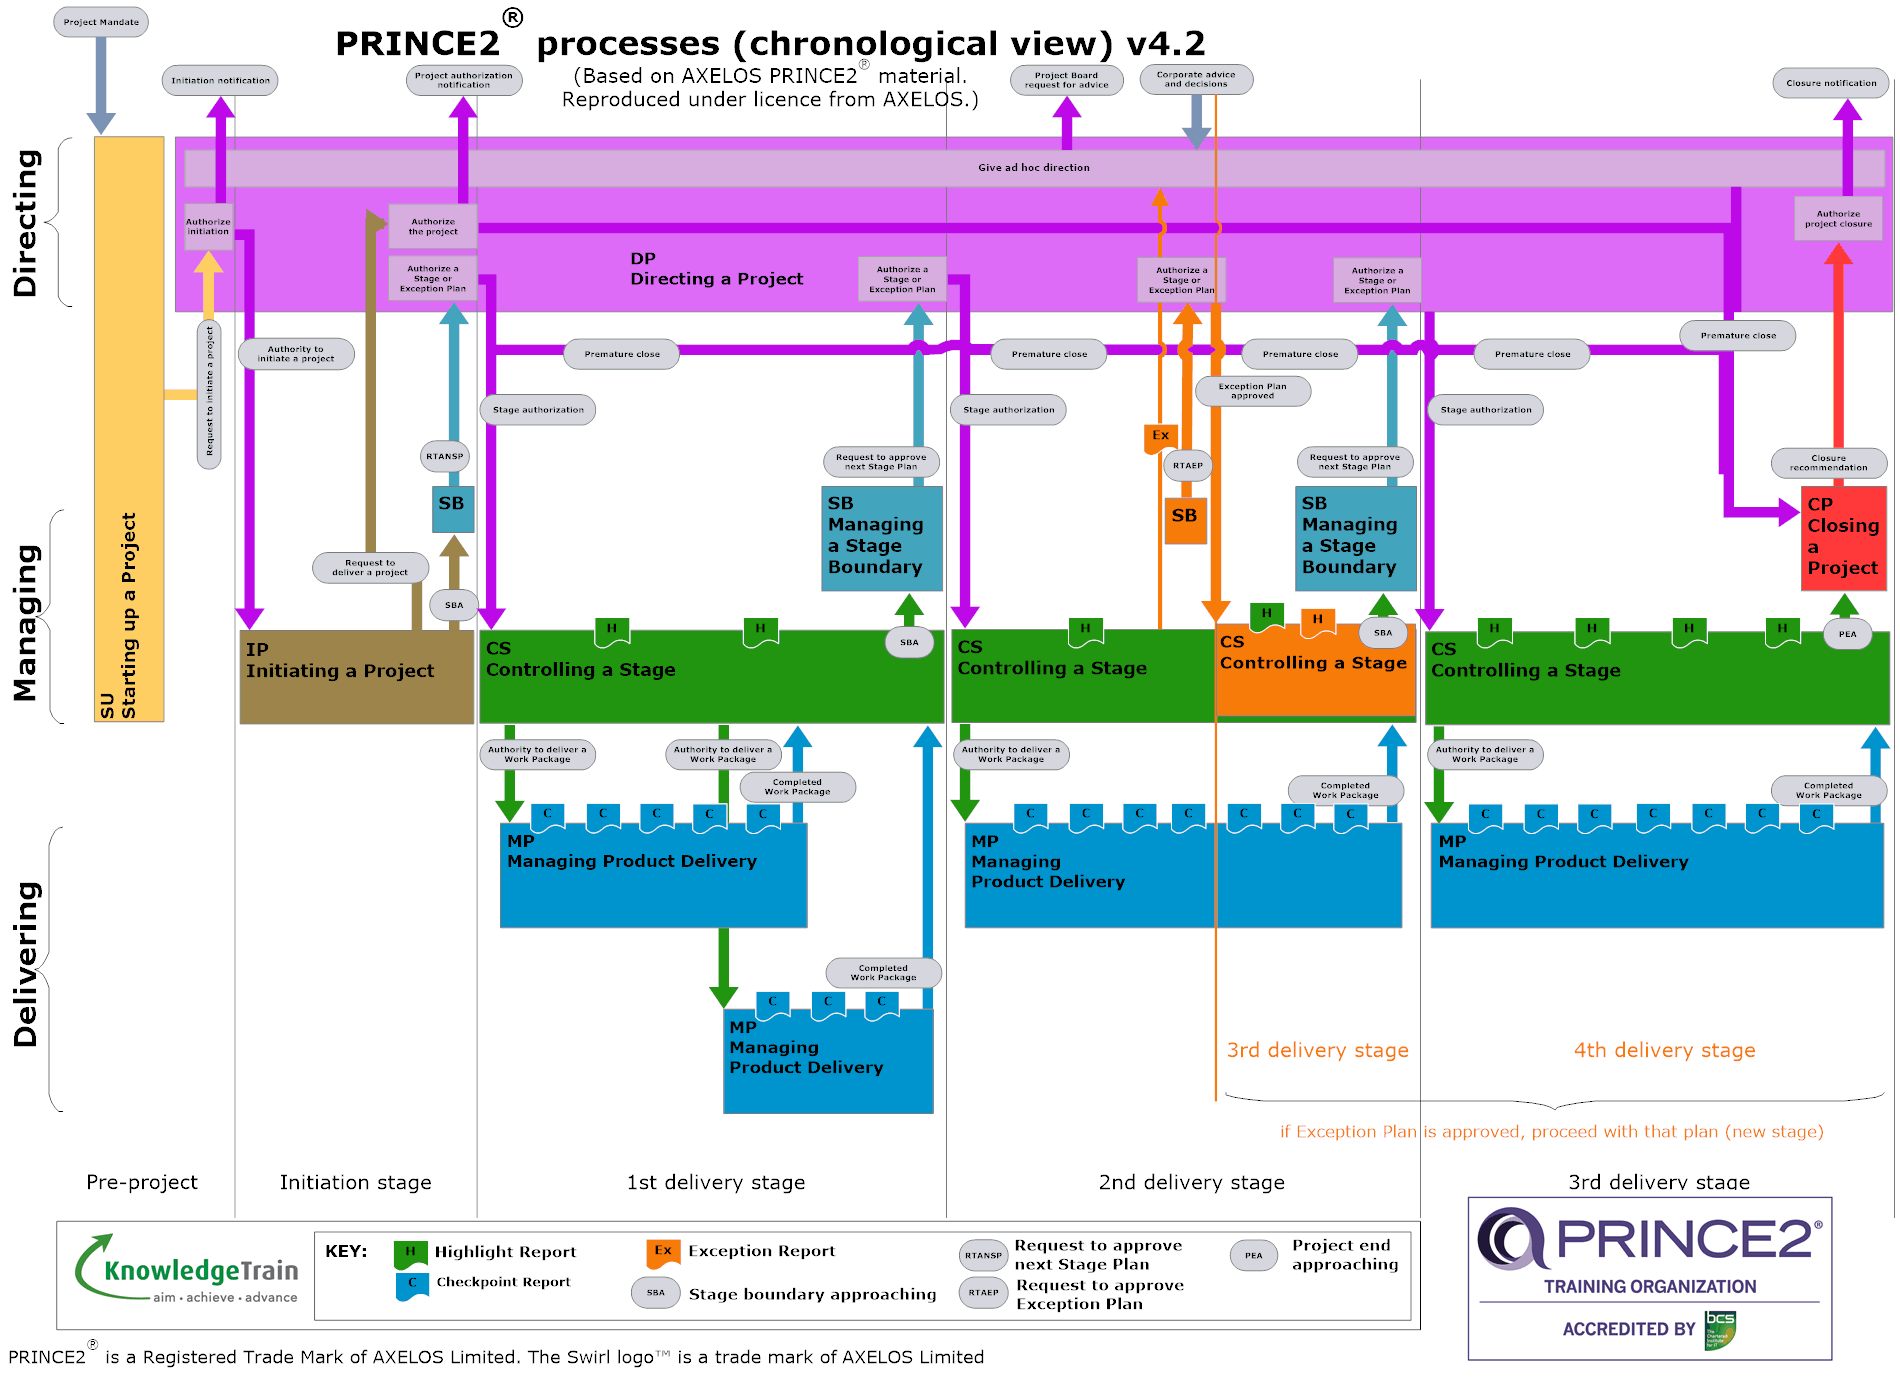 PRINCE2 process model - activity view